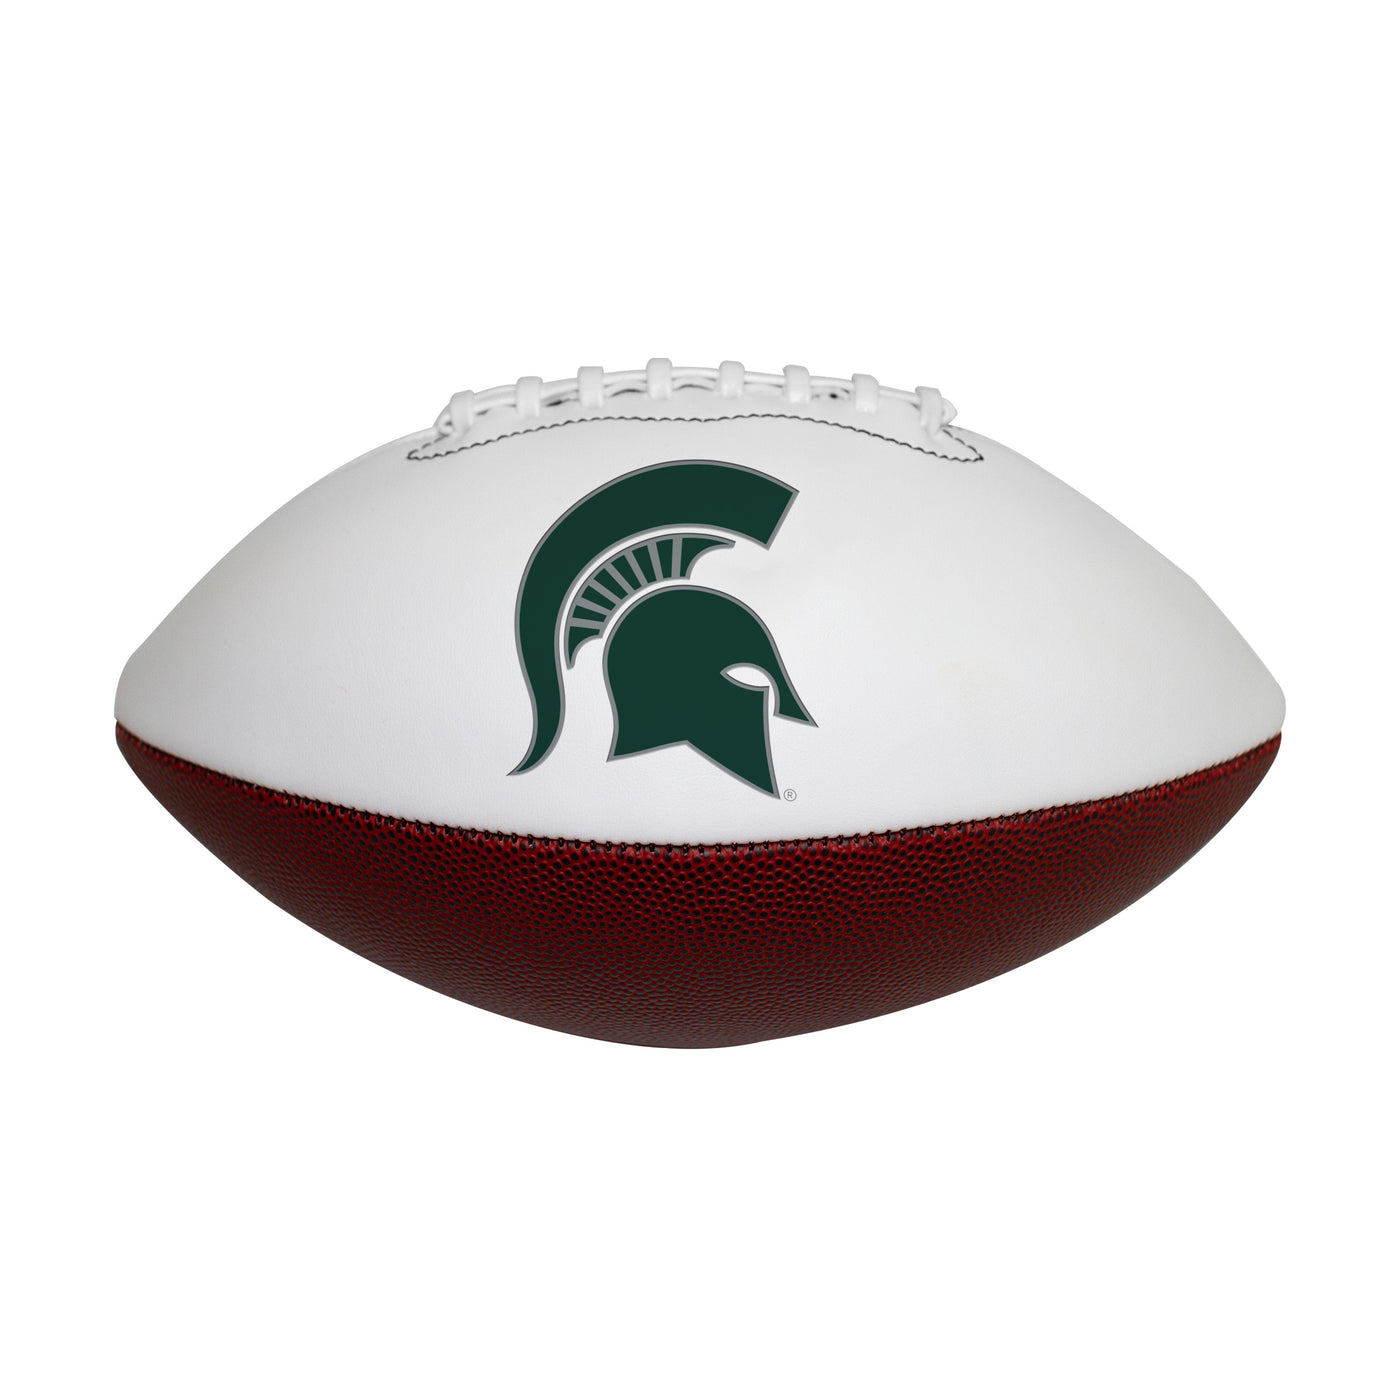 MI State Official-Size Autograph Football